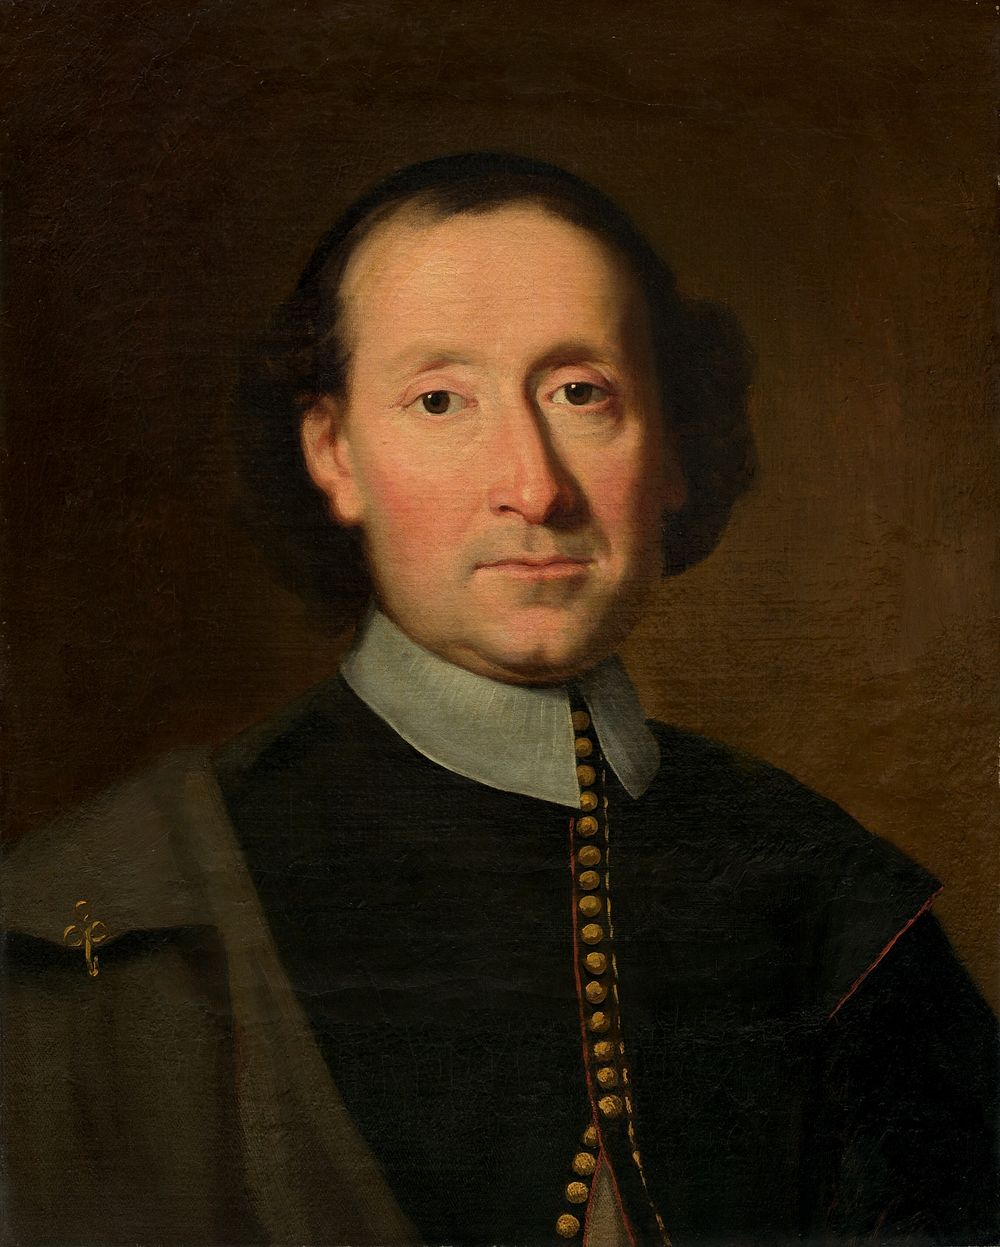 Portrait of a Man (mid 17th century) from the French 17th Century.